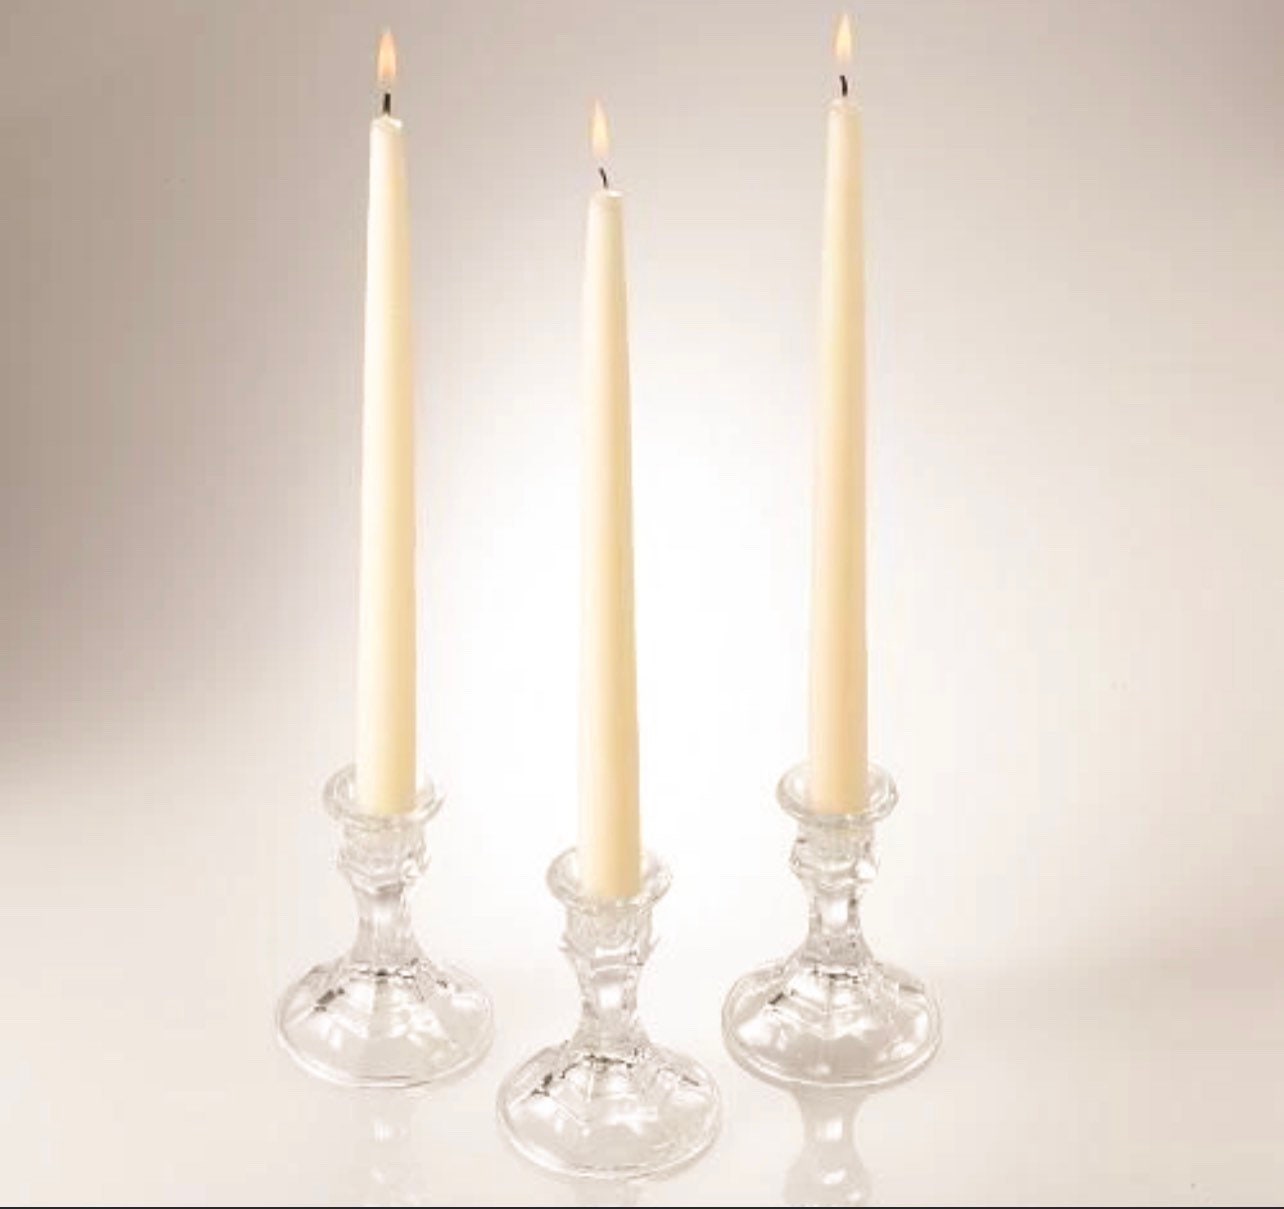 5 Pairs Soy and Beeswax Candles Set of 10 - Hollow Candles Ear 